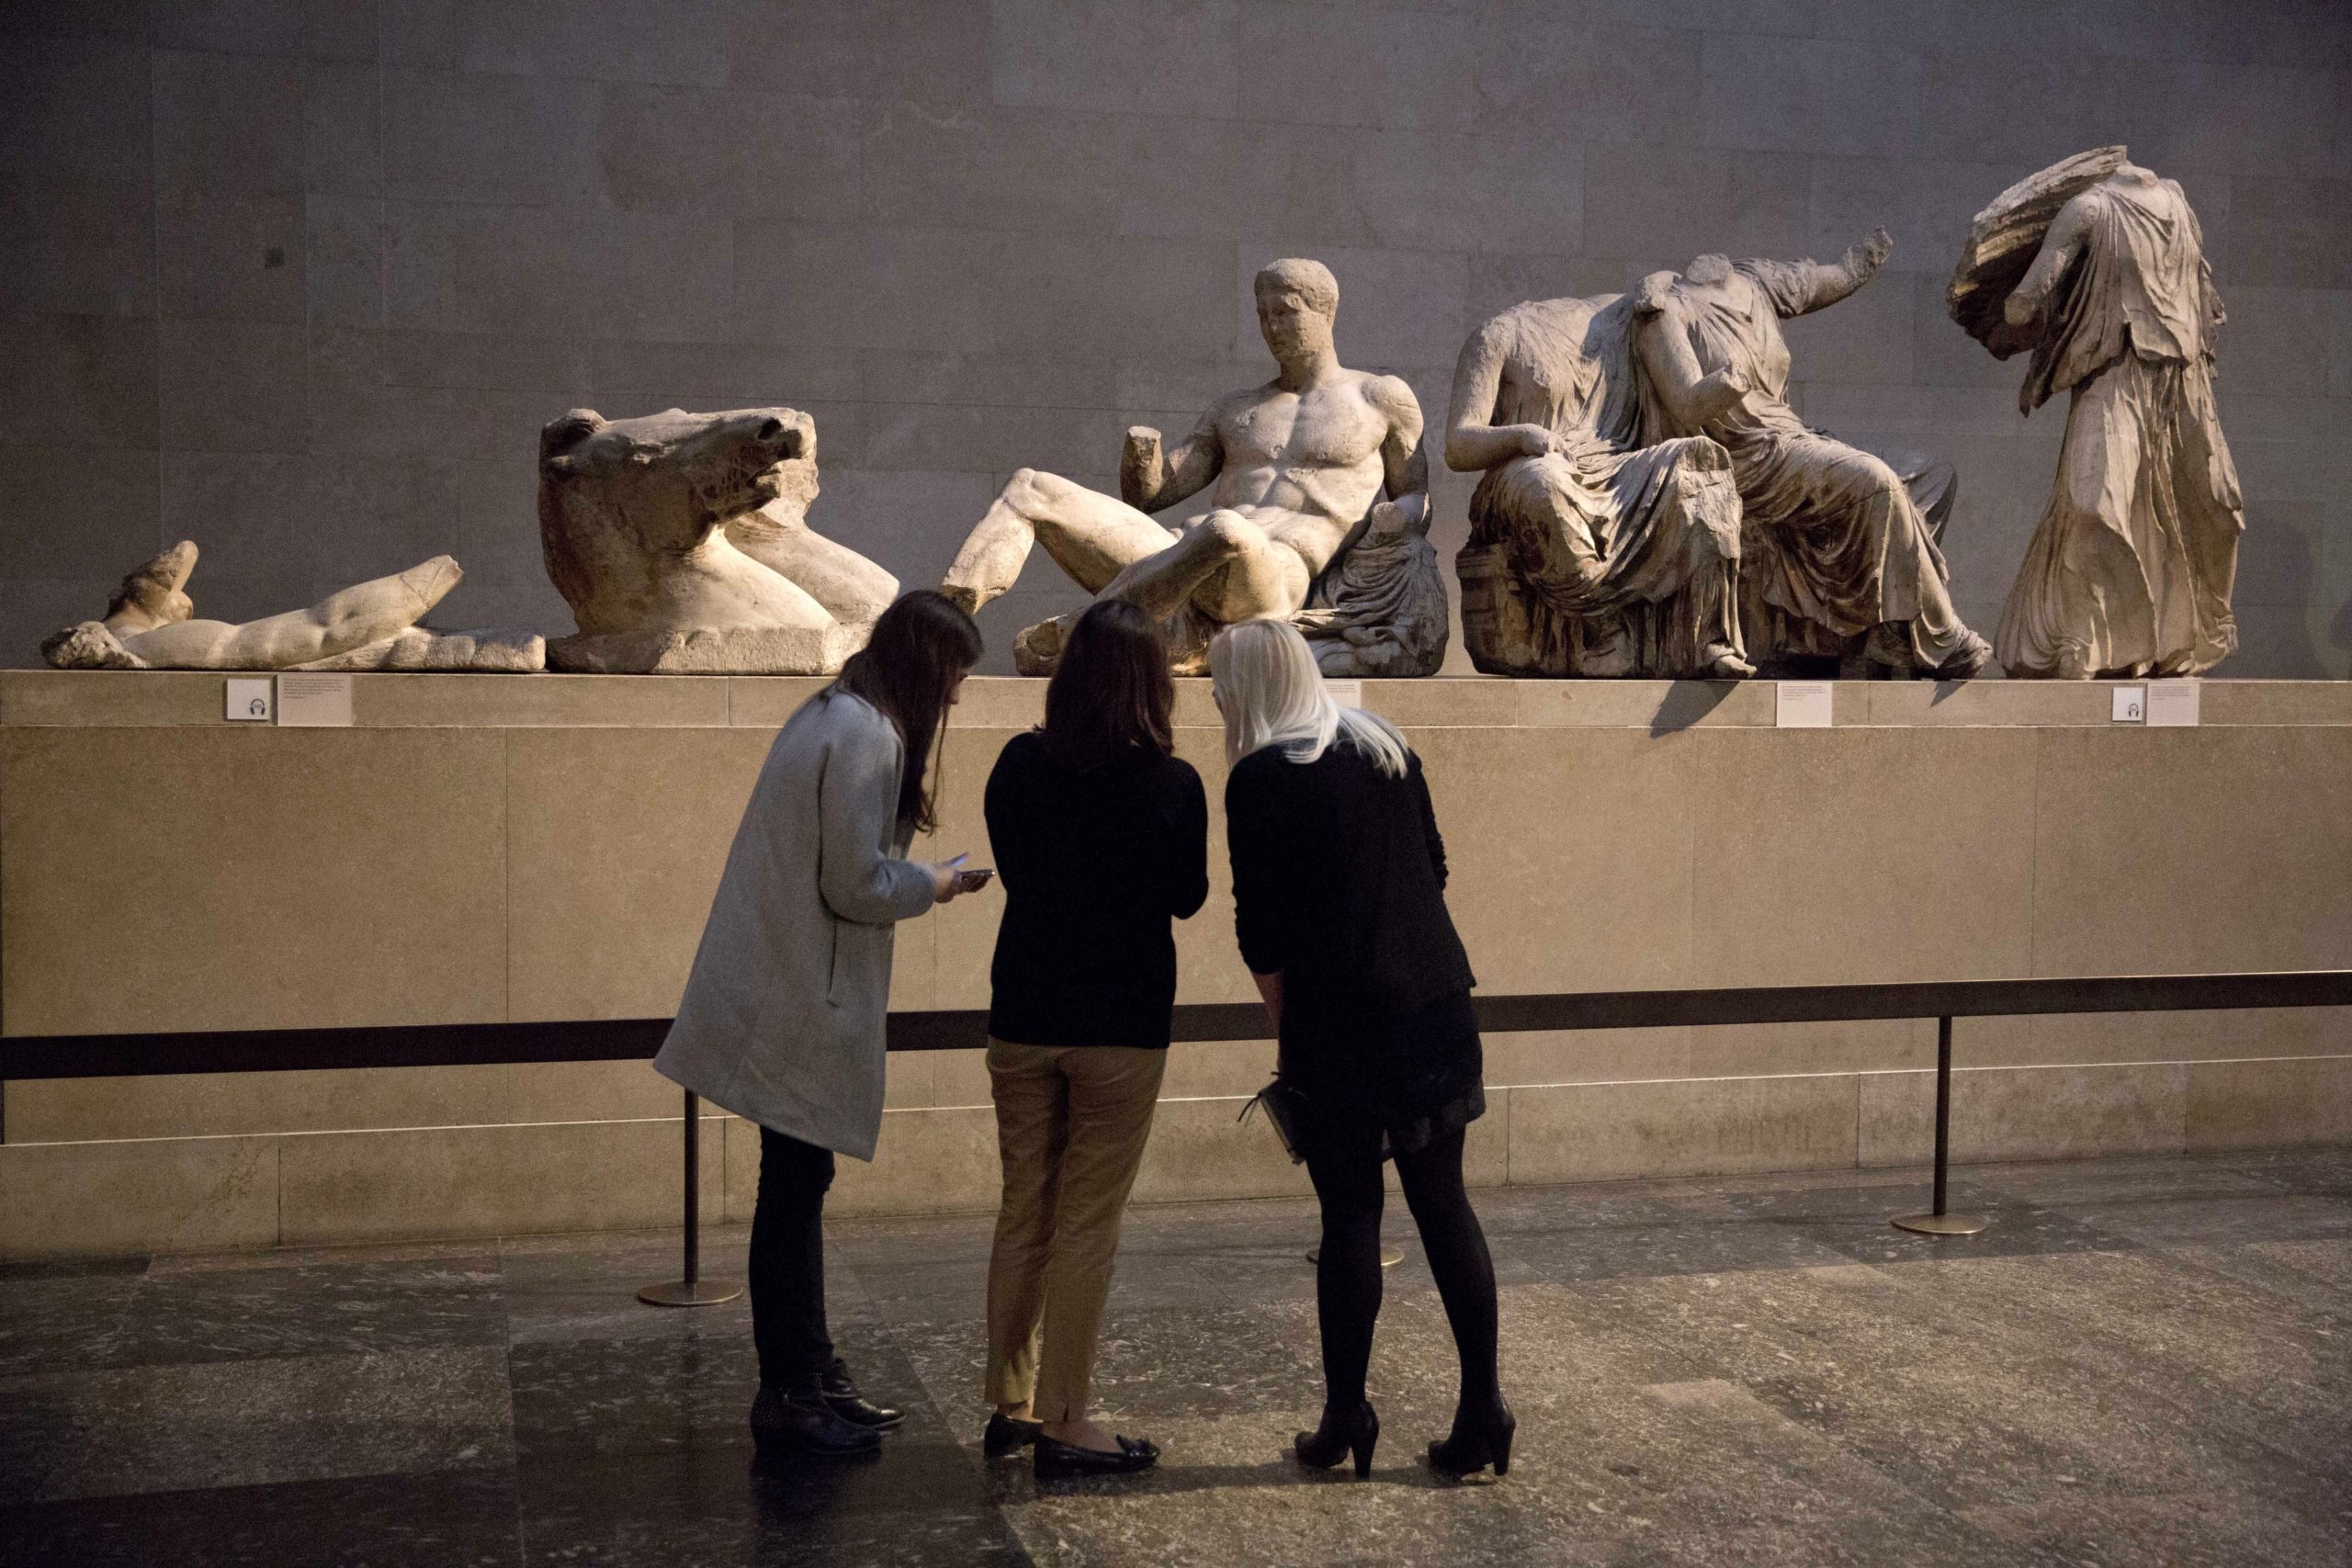 Women stand by a marble statue thought to represent Greek god Dionysos, center, from the east pediment of the Parthenon, during a media photo opportunity to promote an event at the British Museum in London, on Jan. 8, 2015.